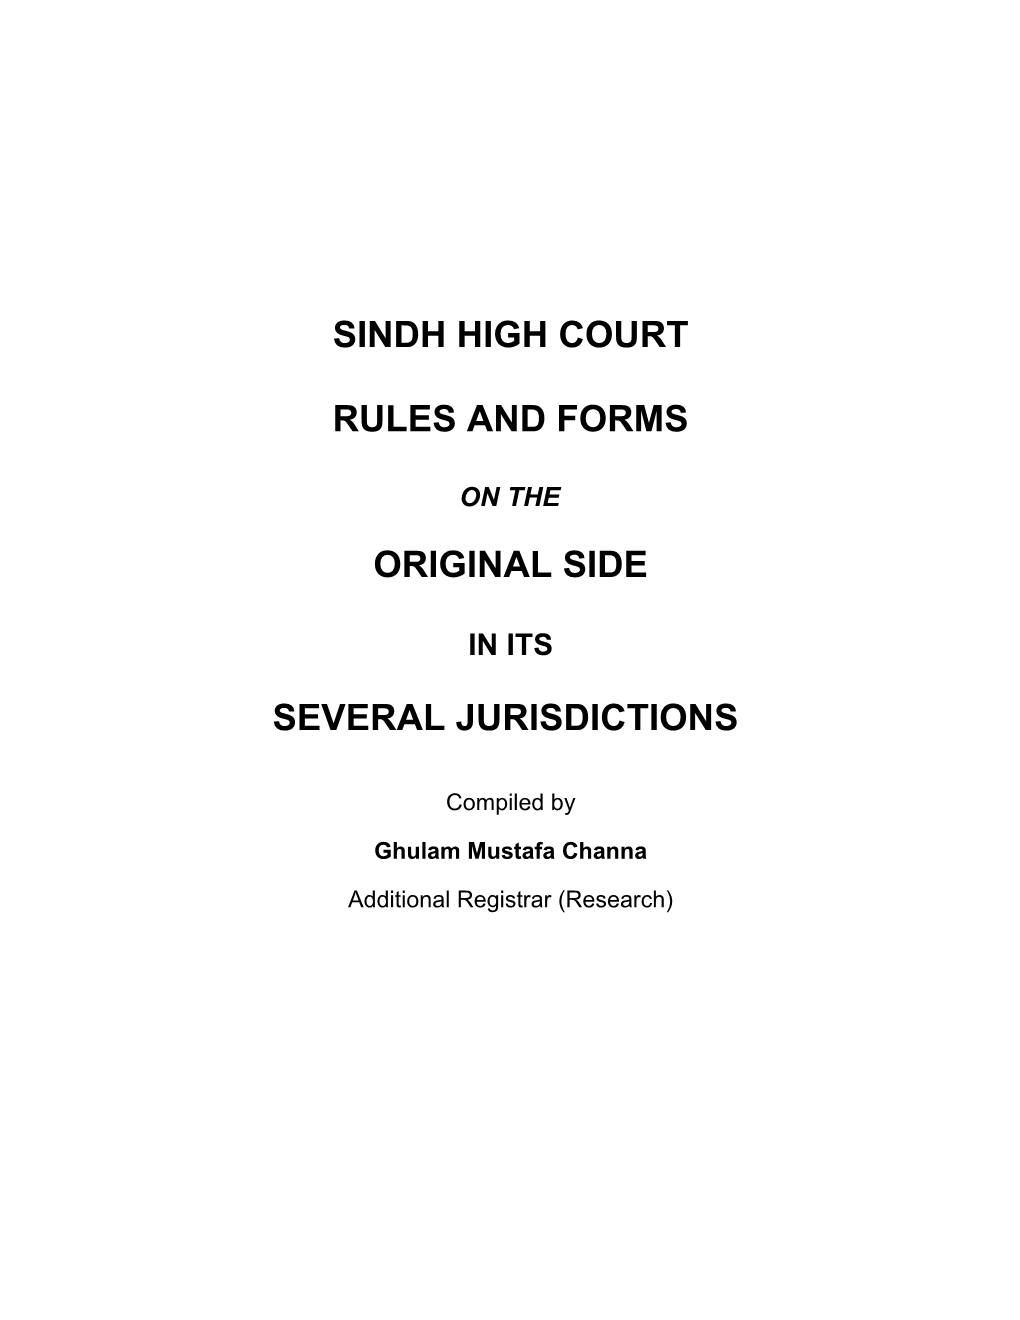 The Sind Chief Court Rules